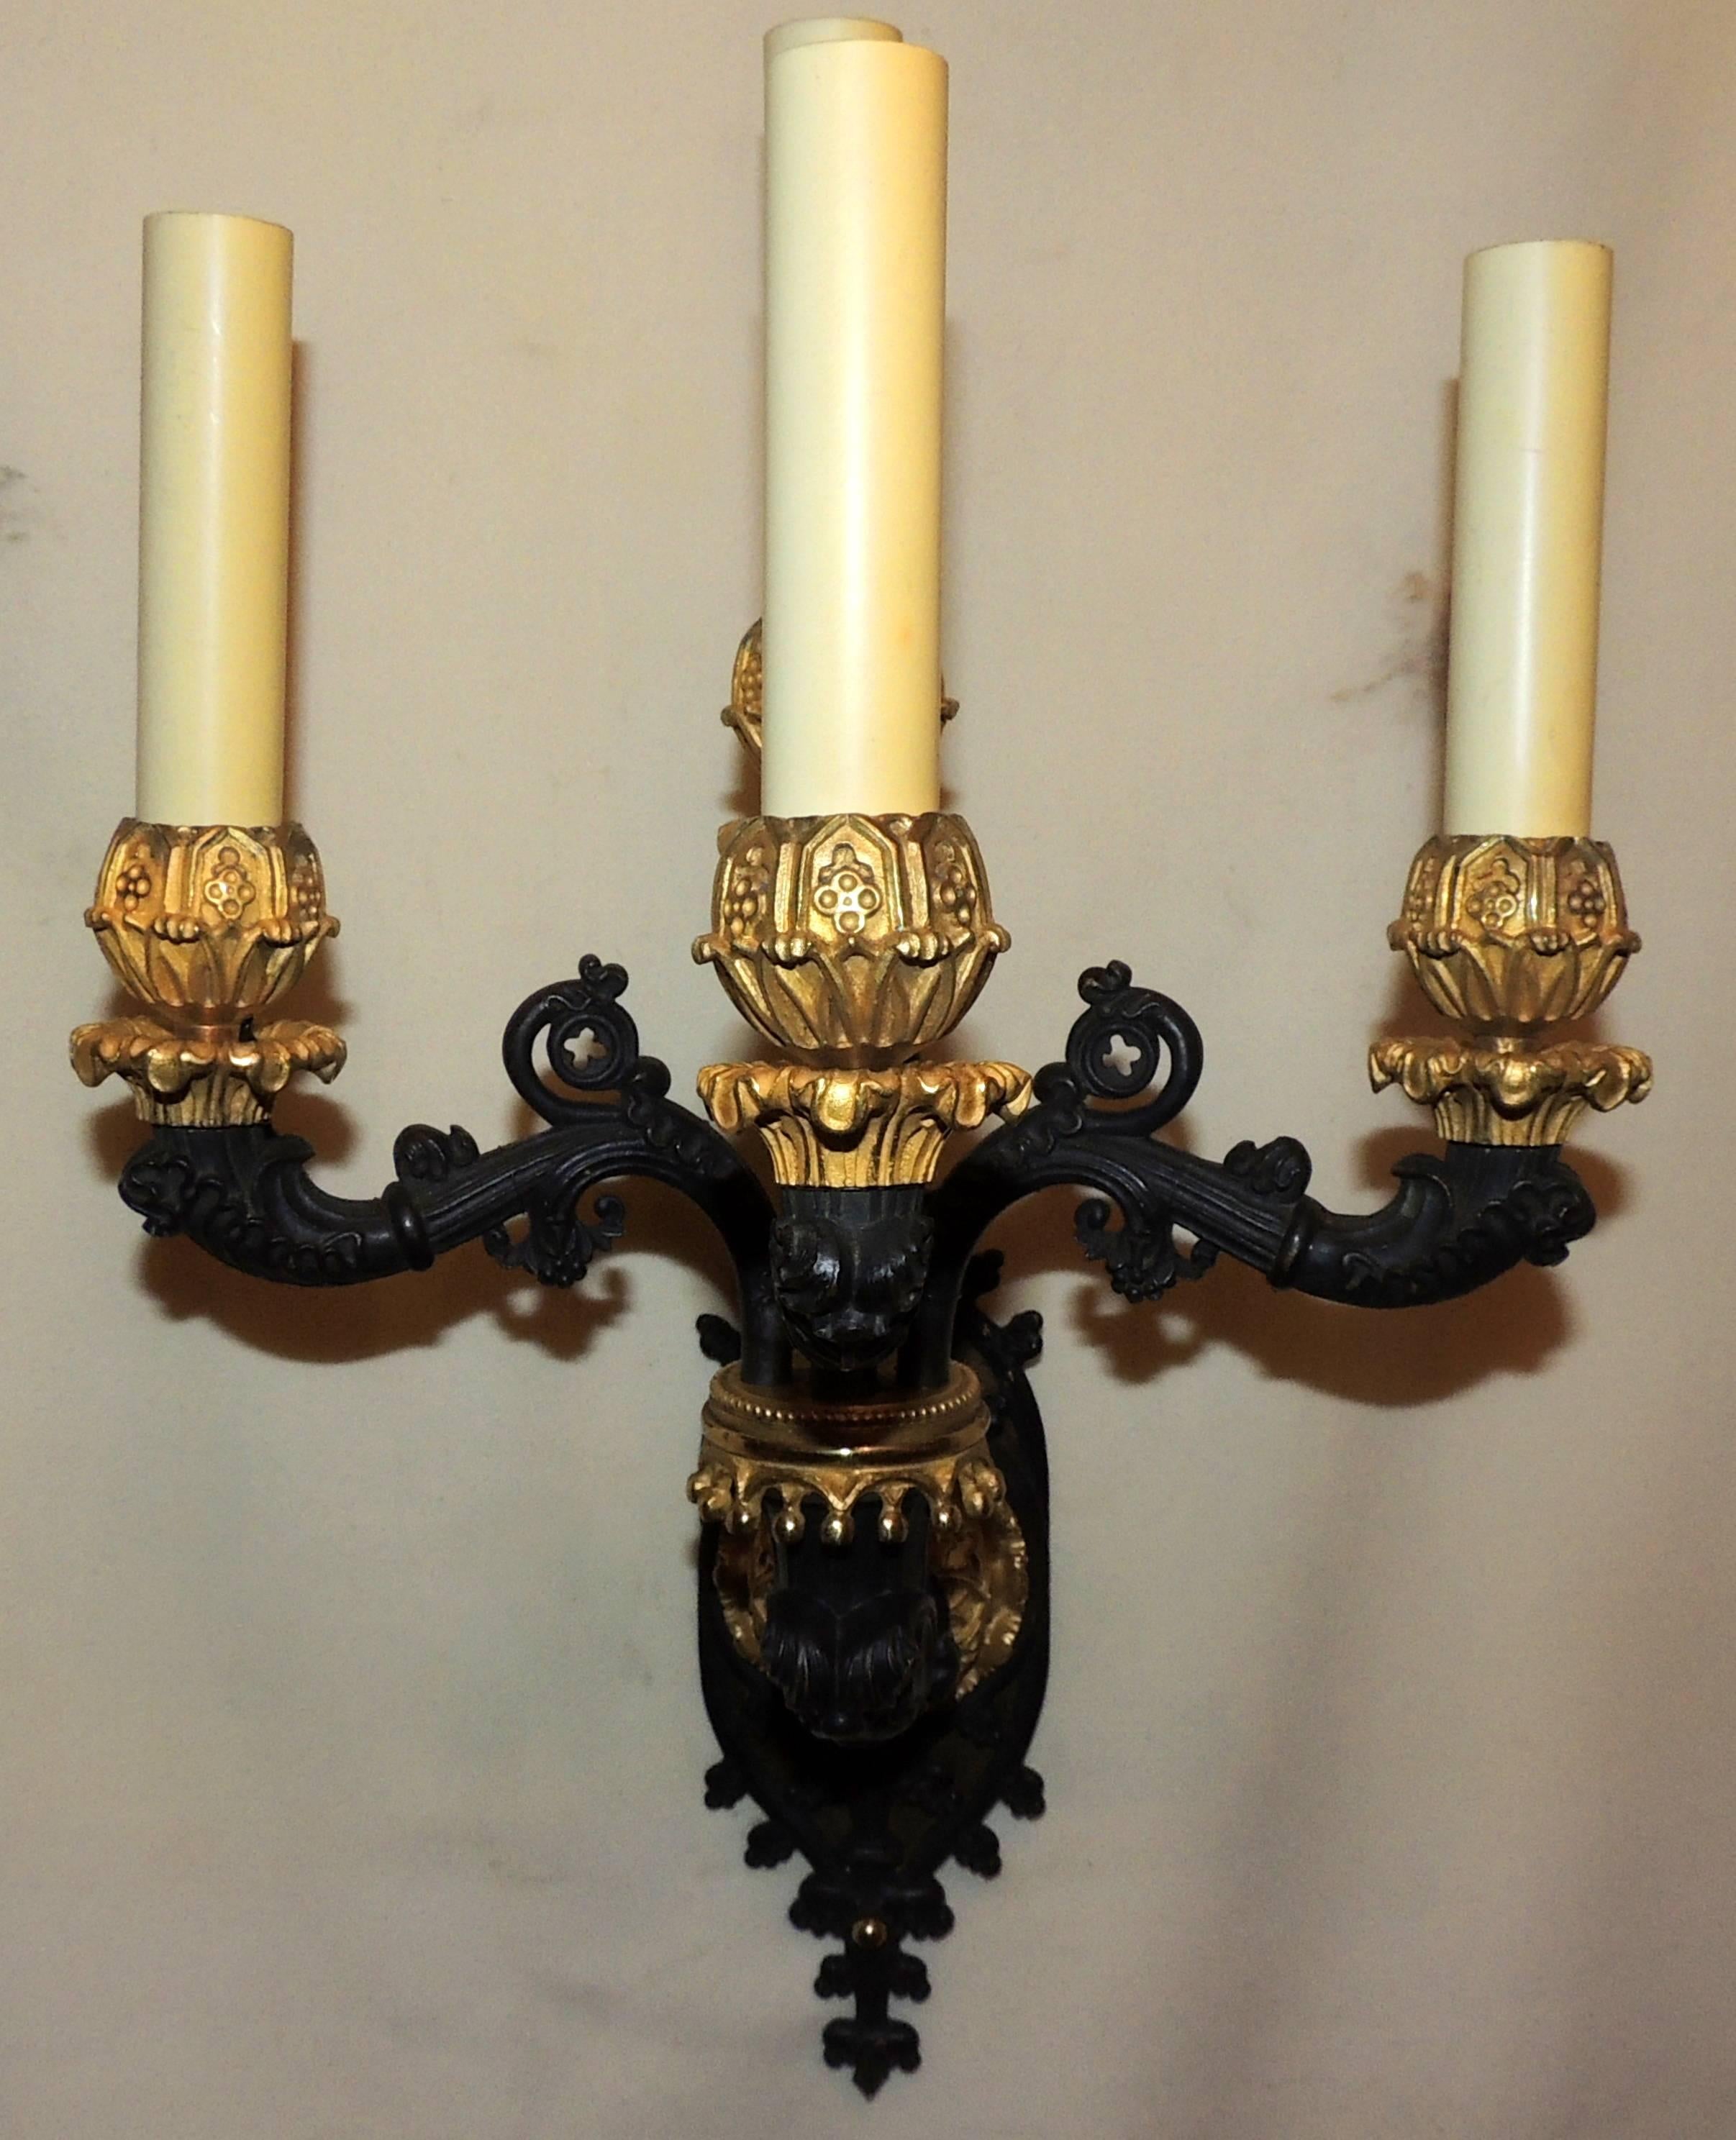 A wonderful pair of French Empire/neoclassical/Regency gilt bronze and patinated four- arm wall sconces.